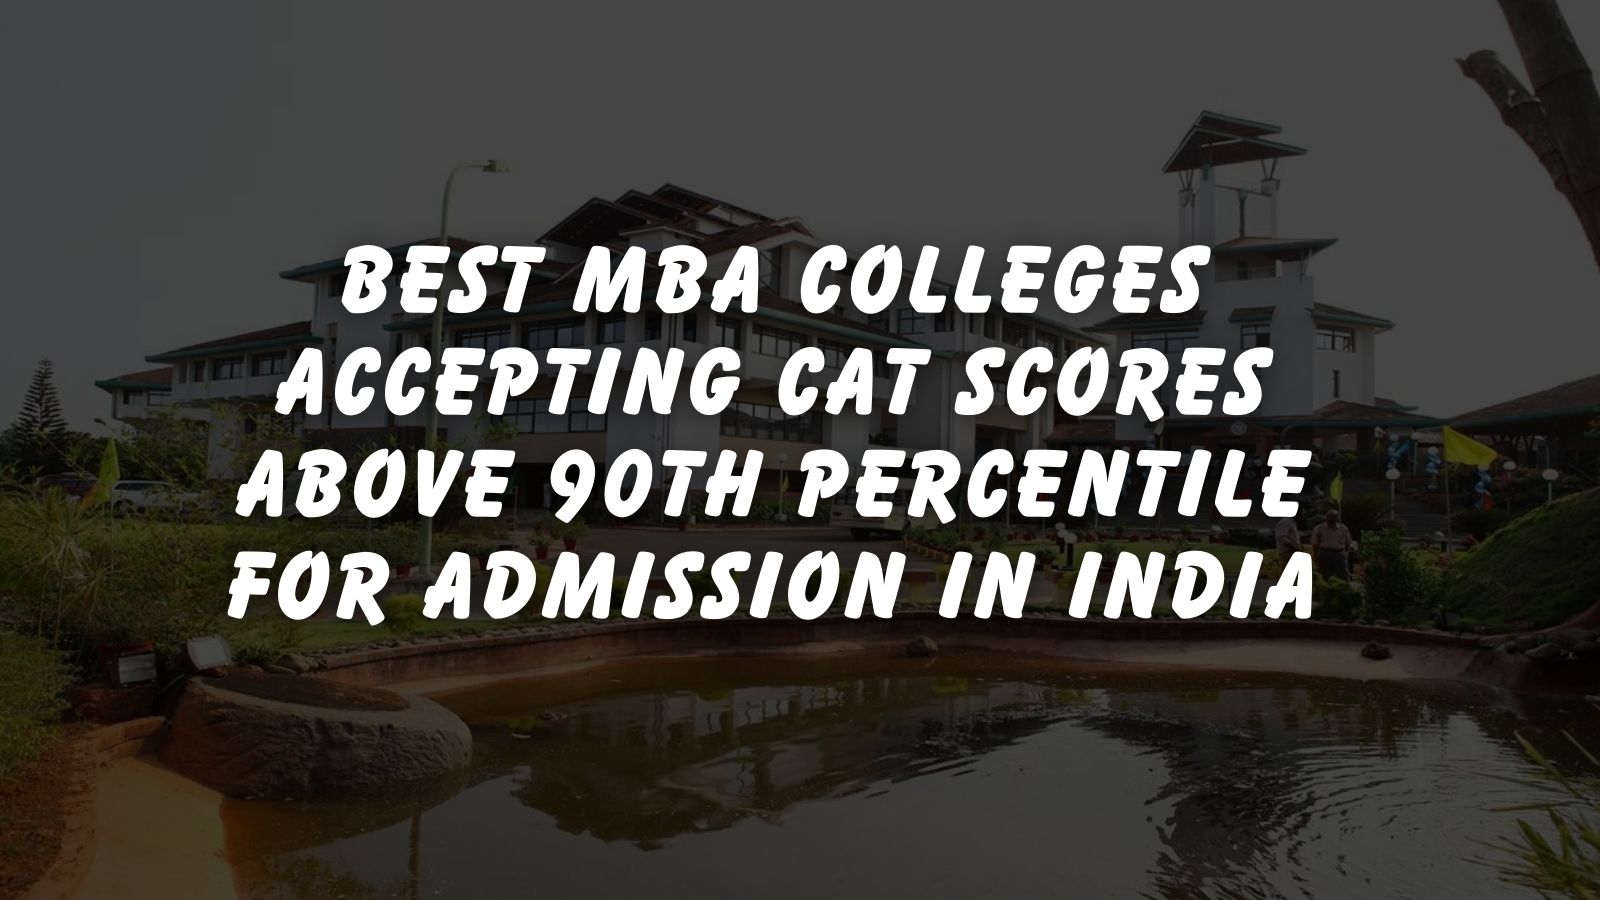 Best MBA Colleges Accepting Cat Scores Above 90th Percentile for Admission in India